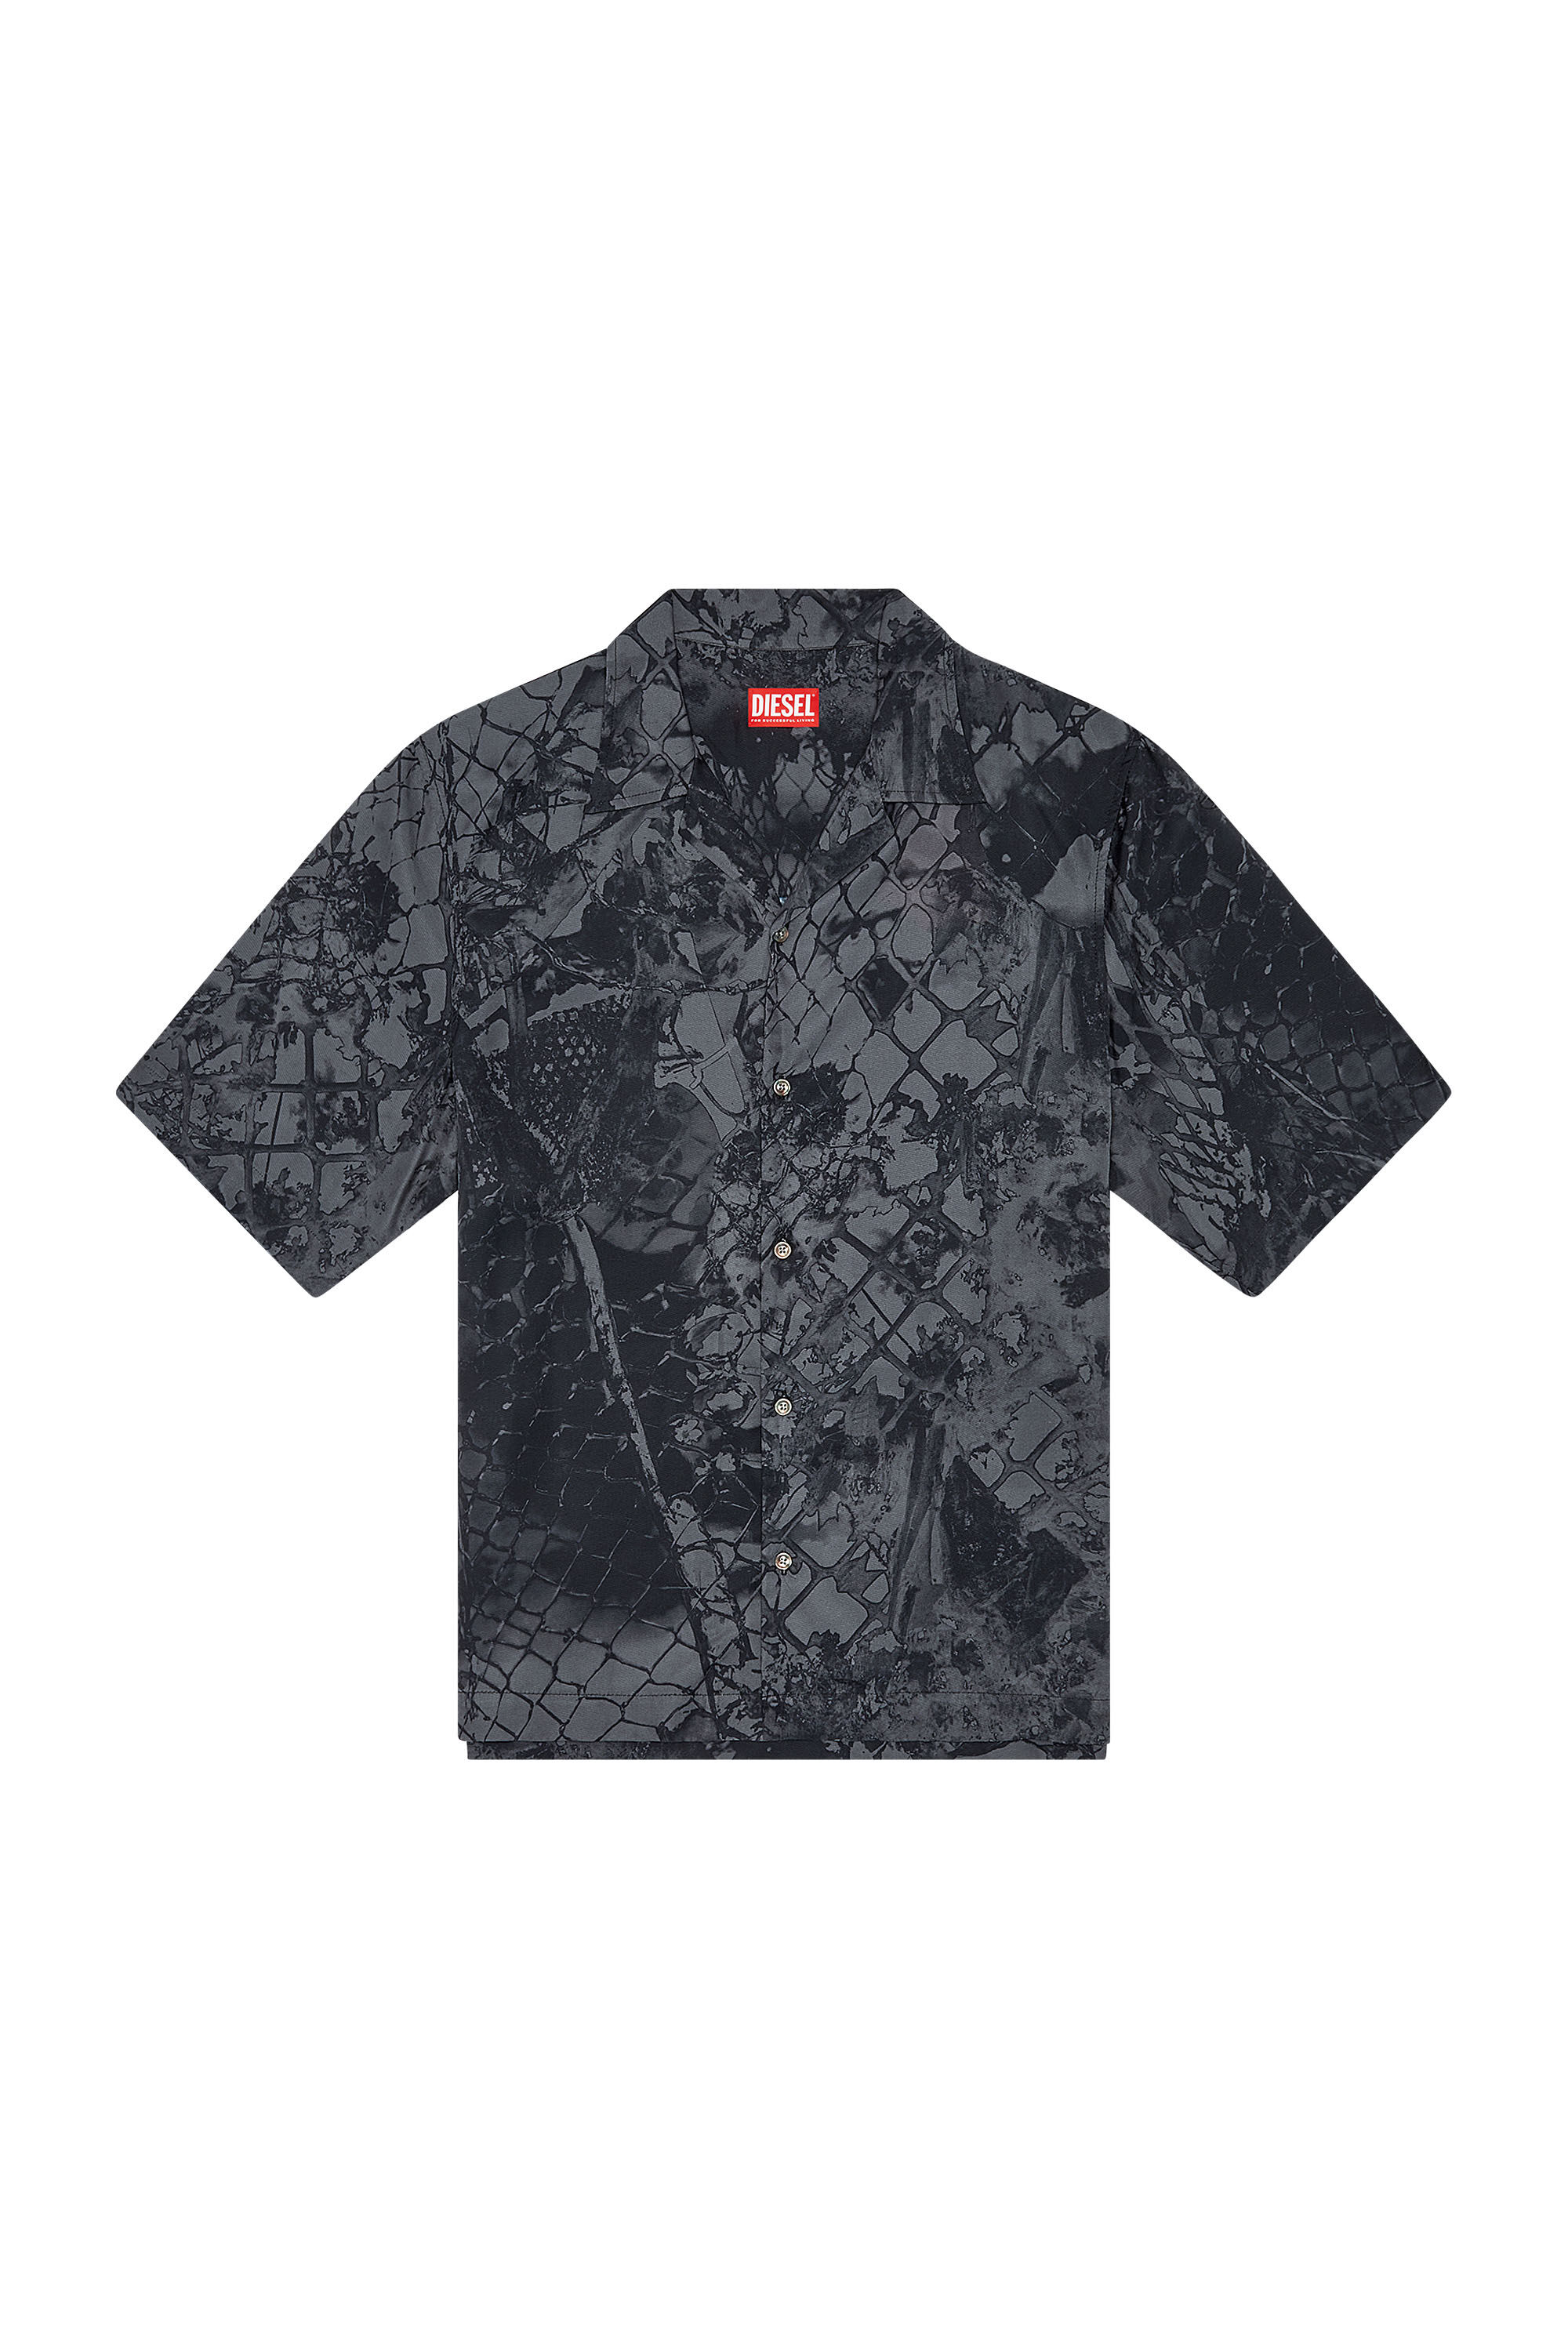 Diesel - S-BRISTOL, Man Bowling shirt with abstract print in Black - Image 2